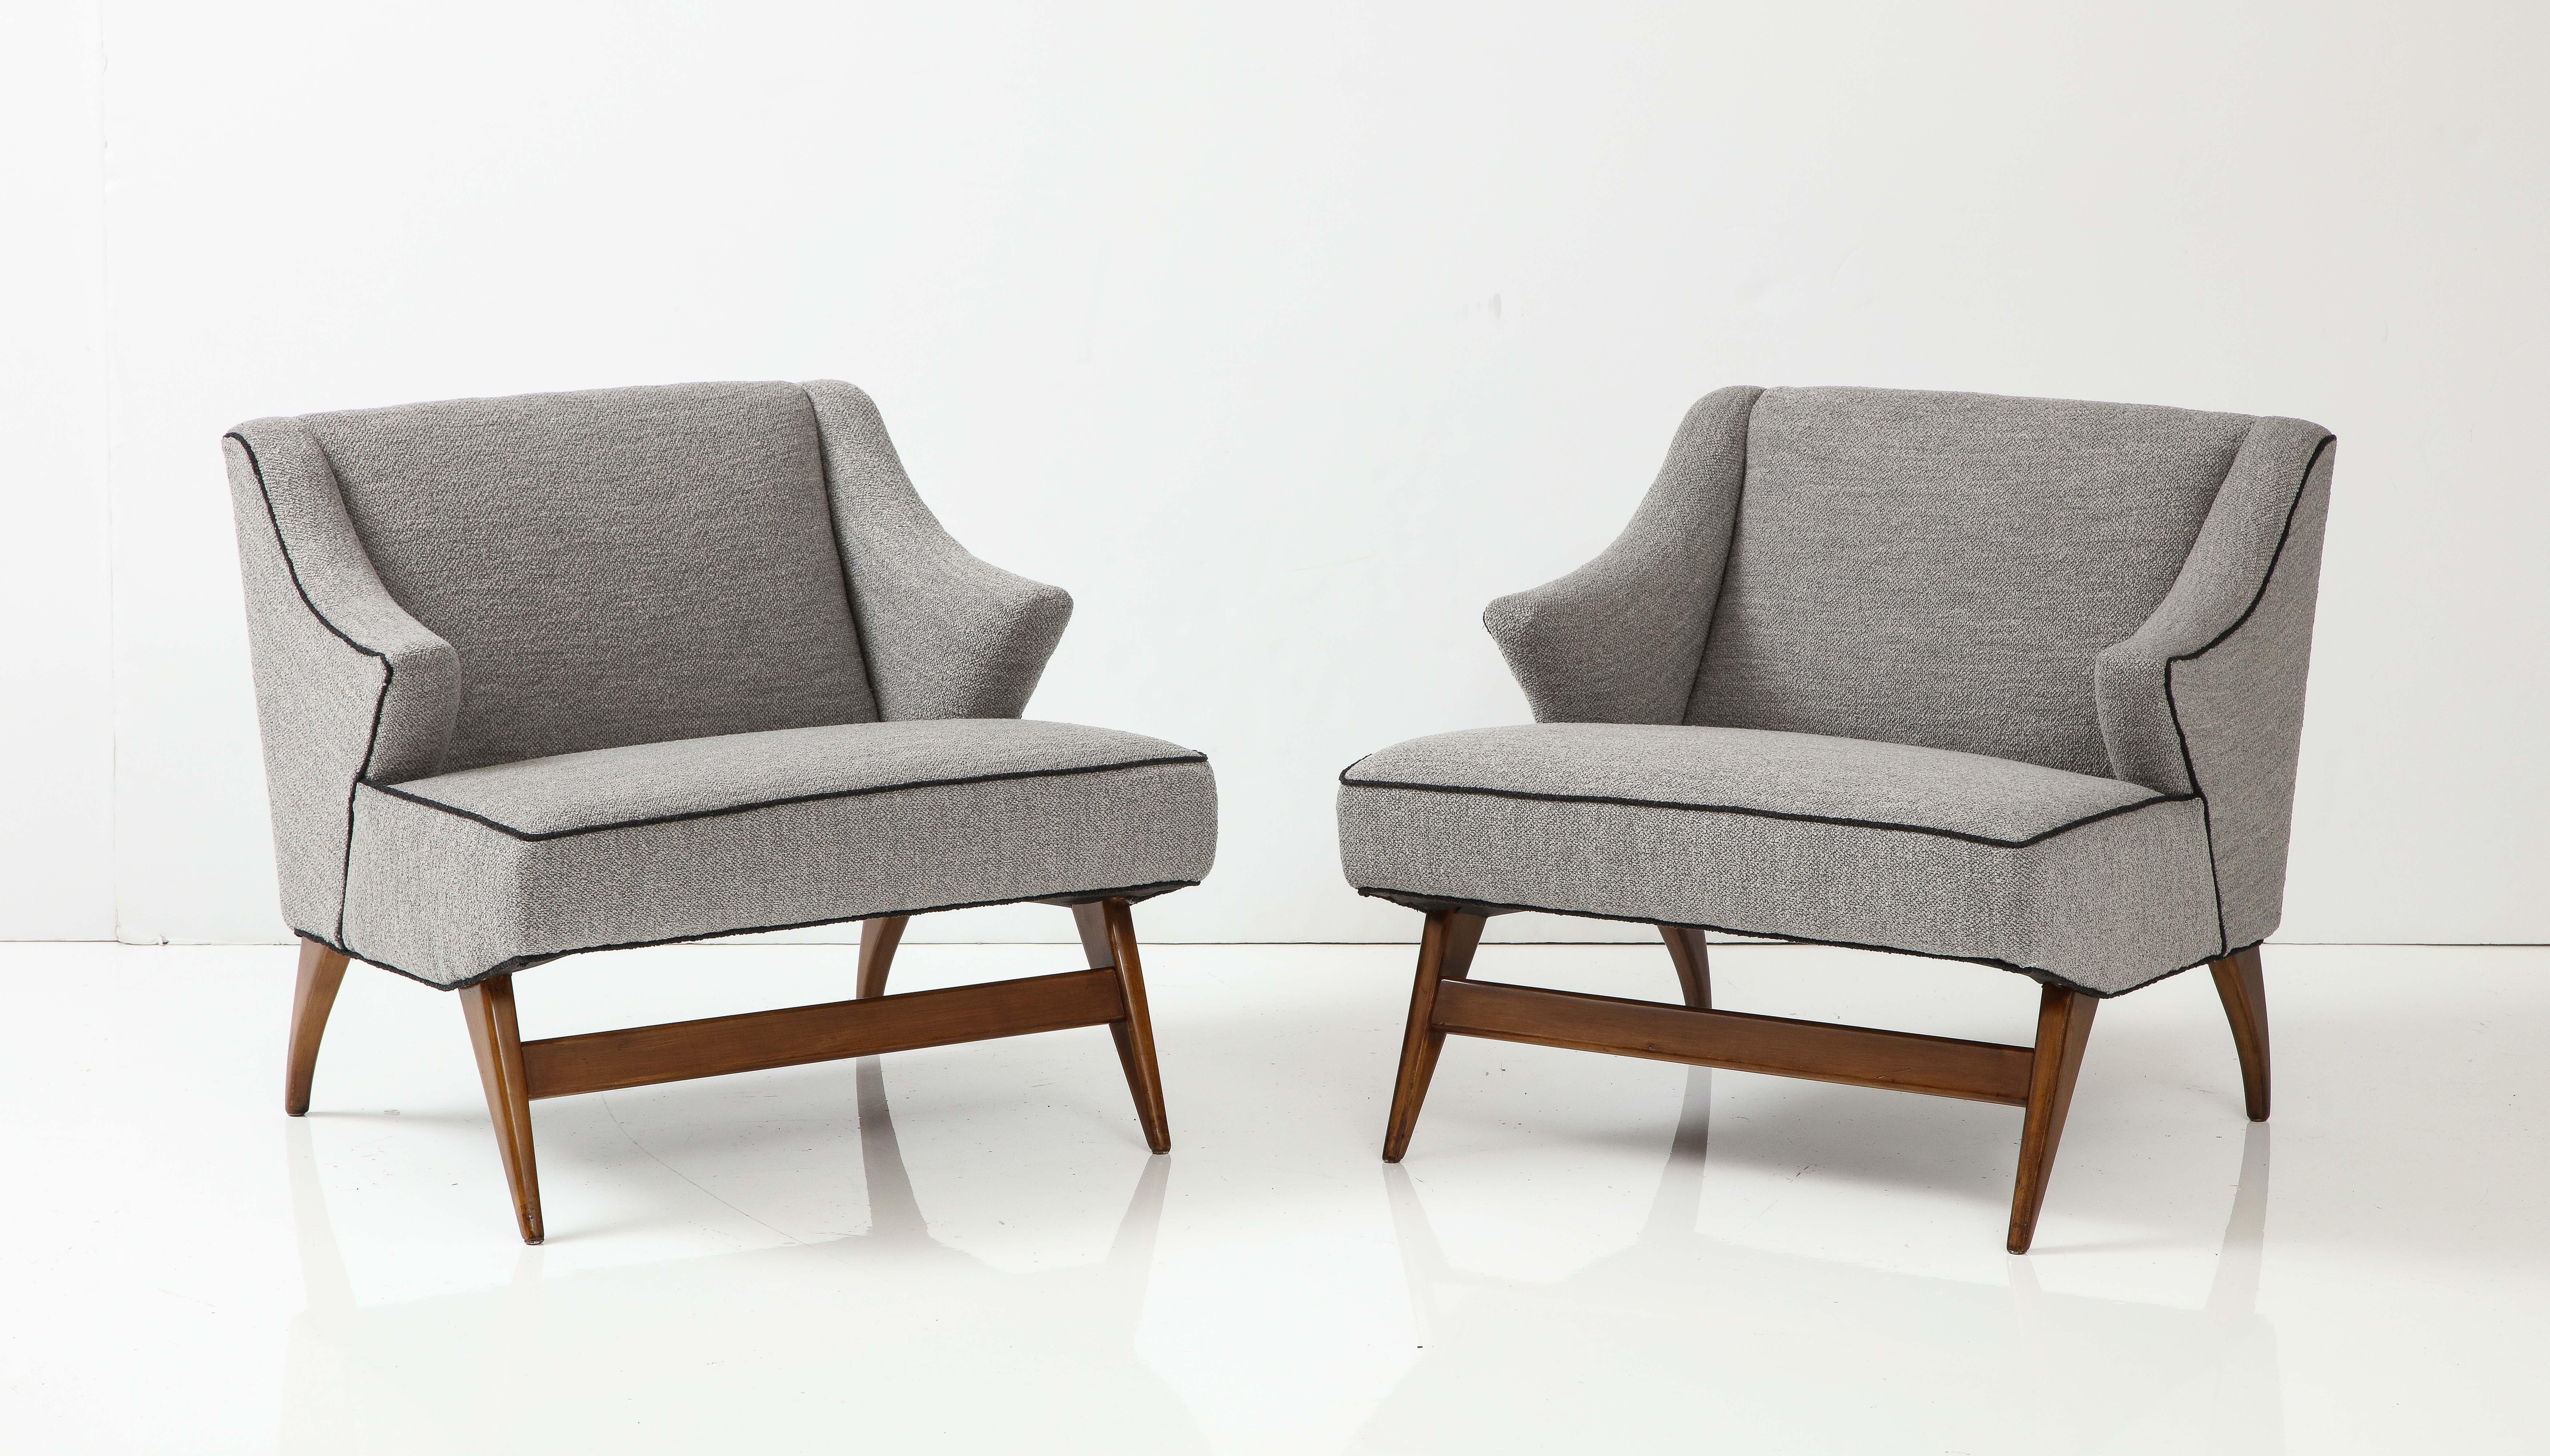 1960s Mid-Century Modern Sculptural Lounge Chairs with Fruit-Wood Base In Good Condition For Sale In New York, NY